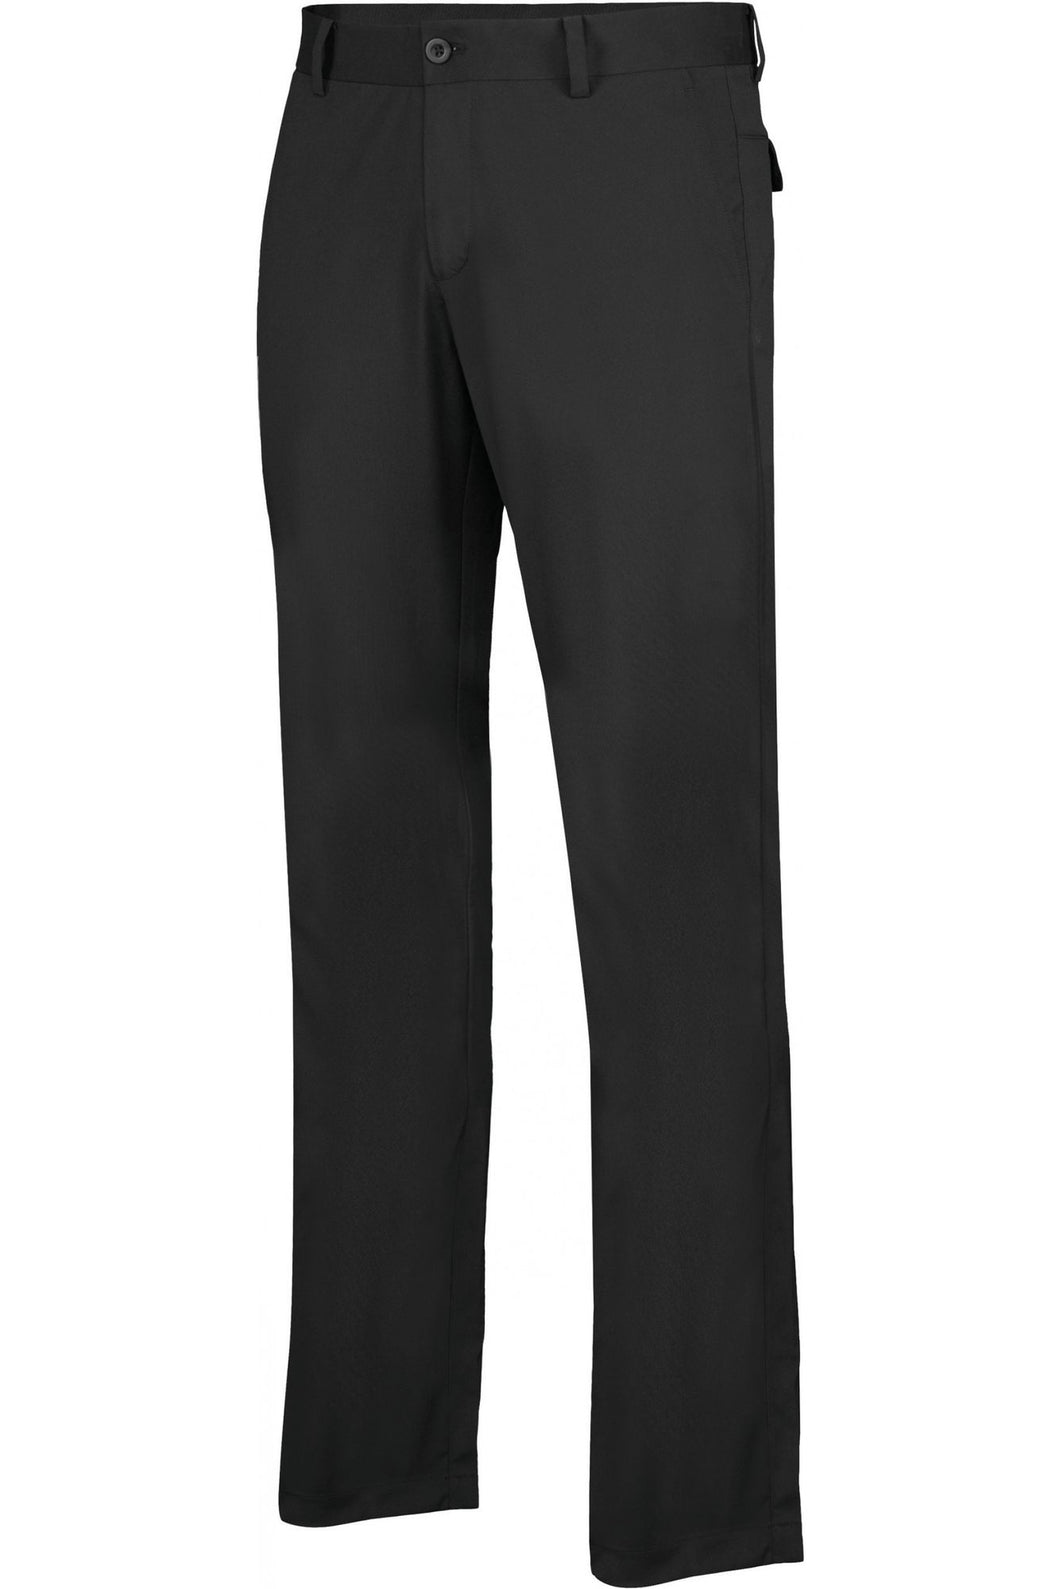 Proact Mens Trousers